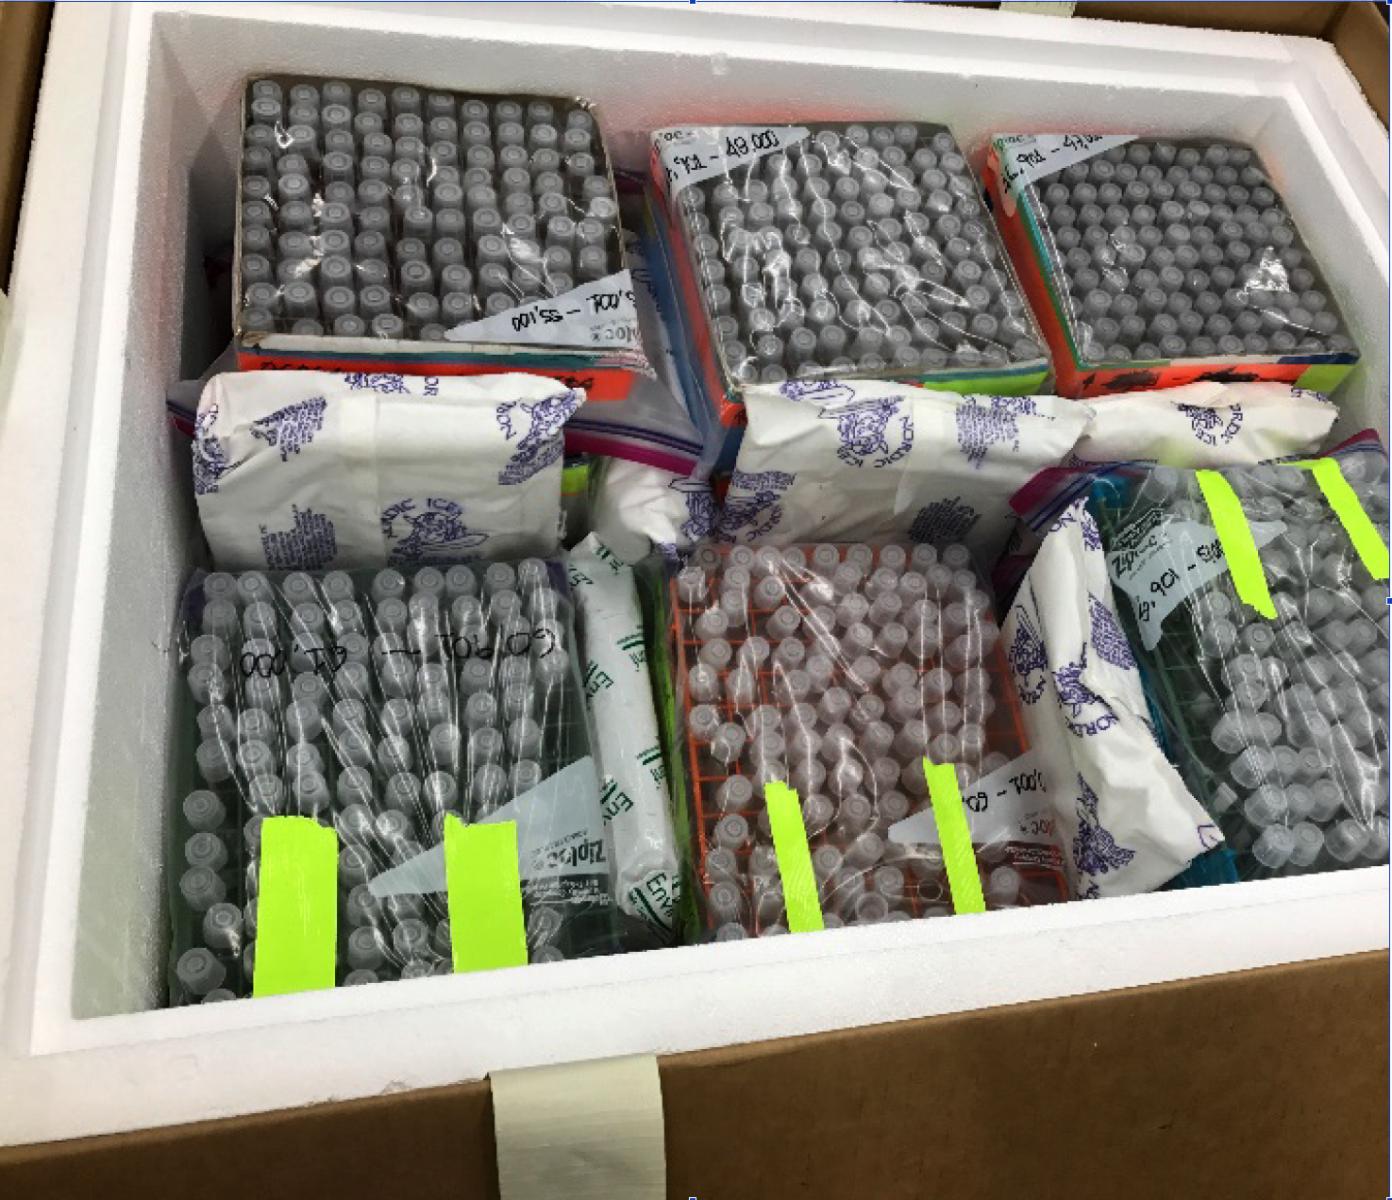 Photo showing multiple bagged boxes of tubes inside an insulated box with cold packs.